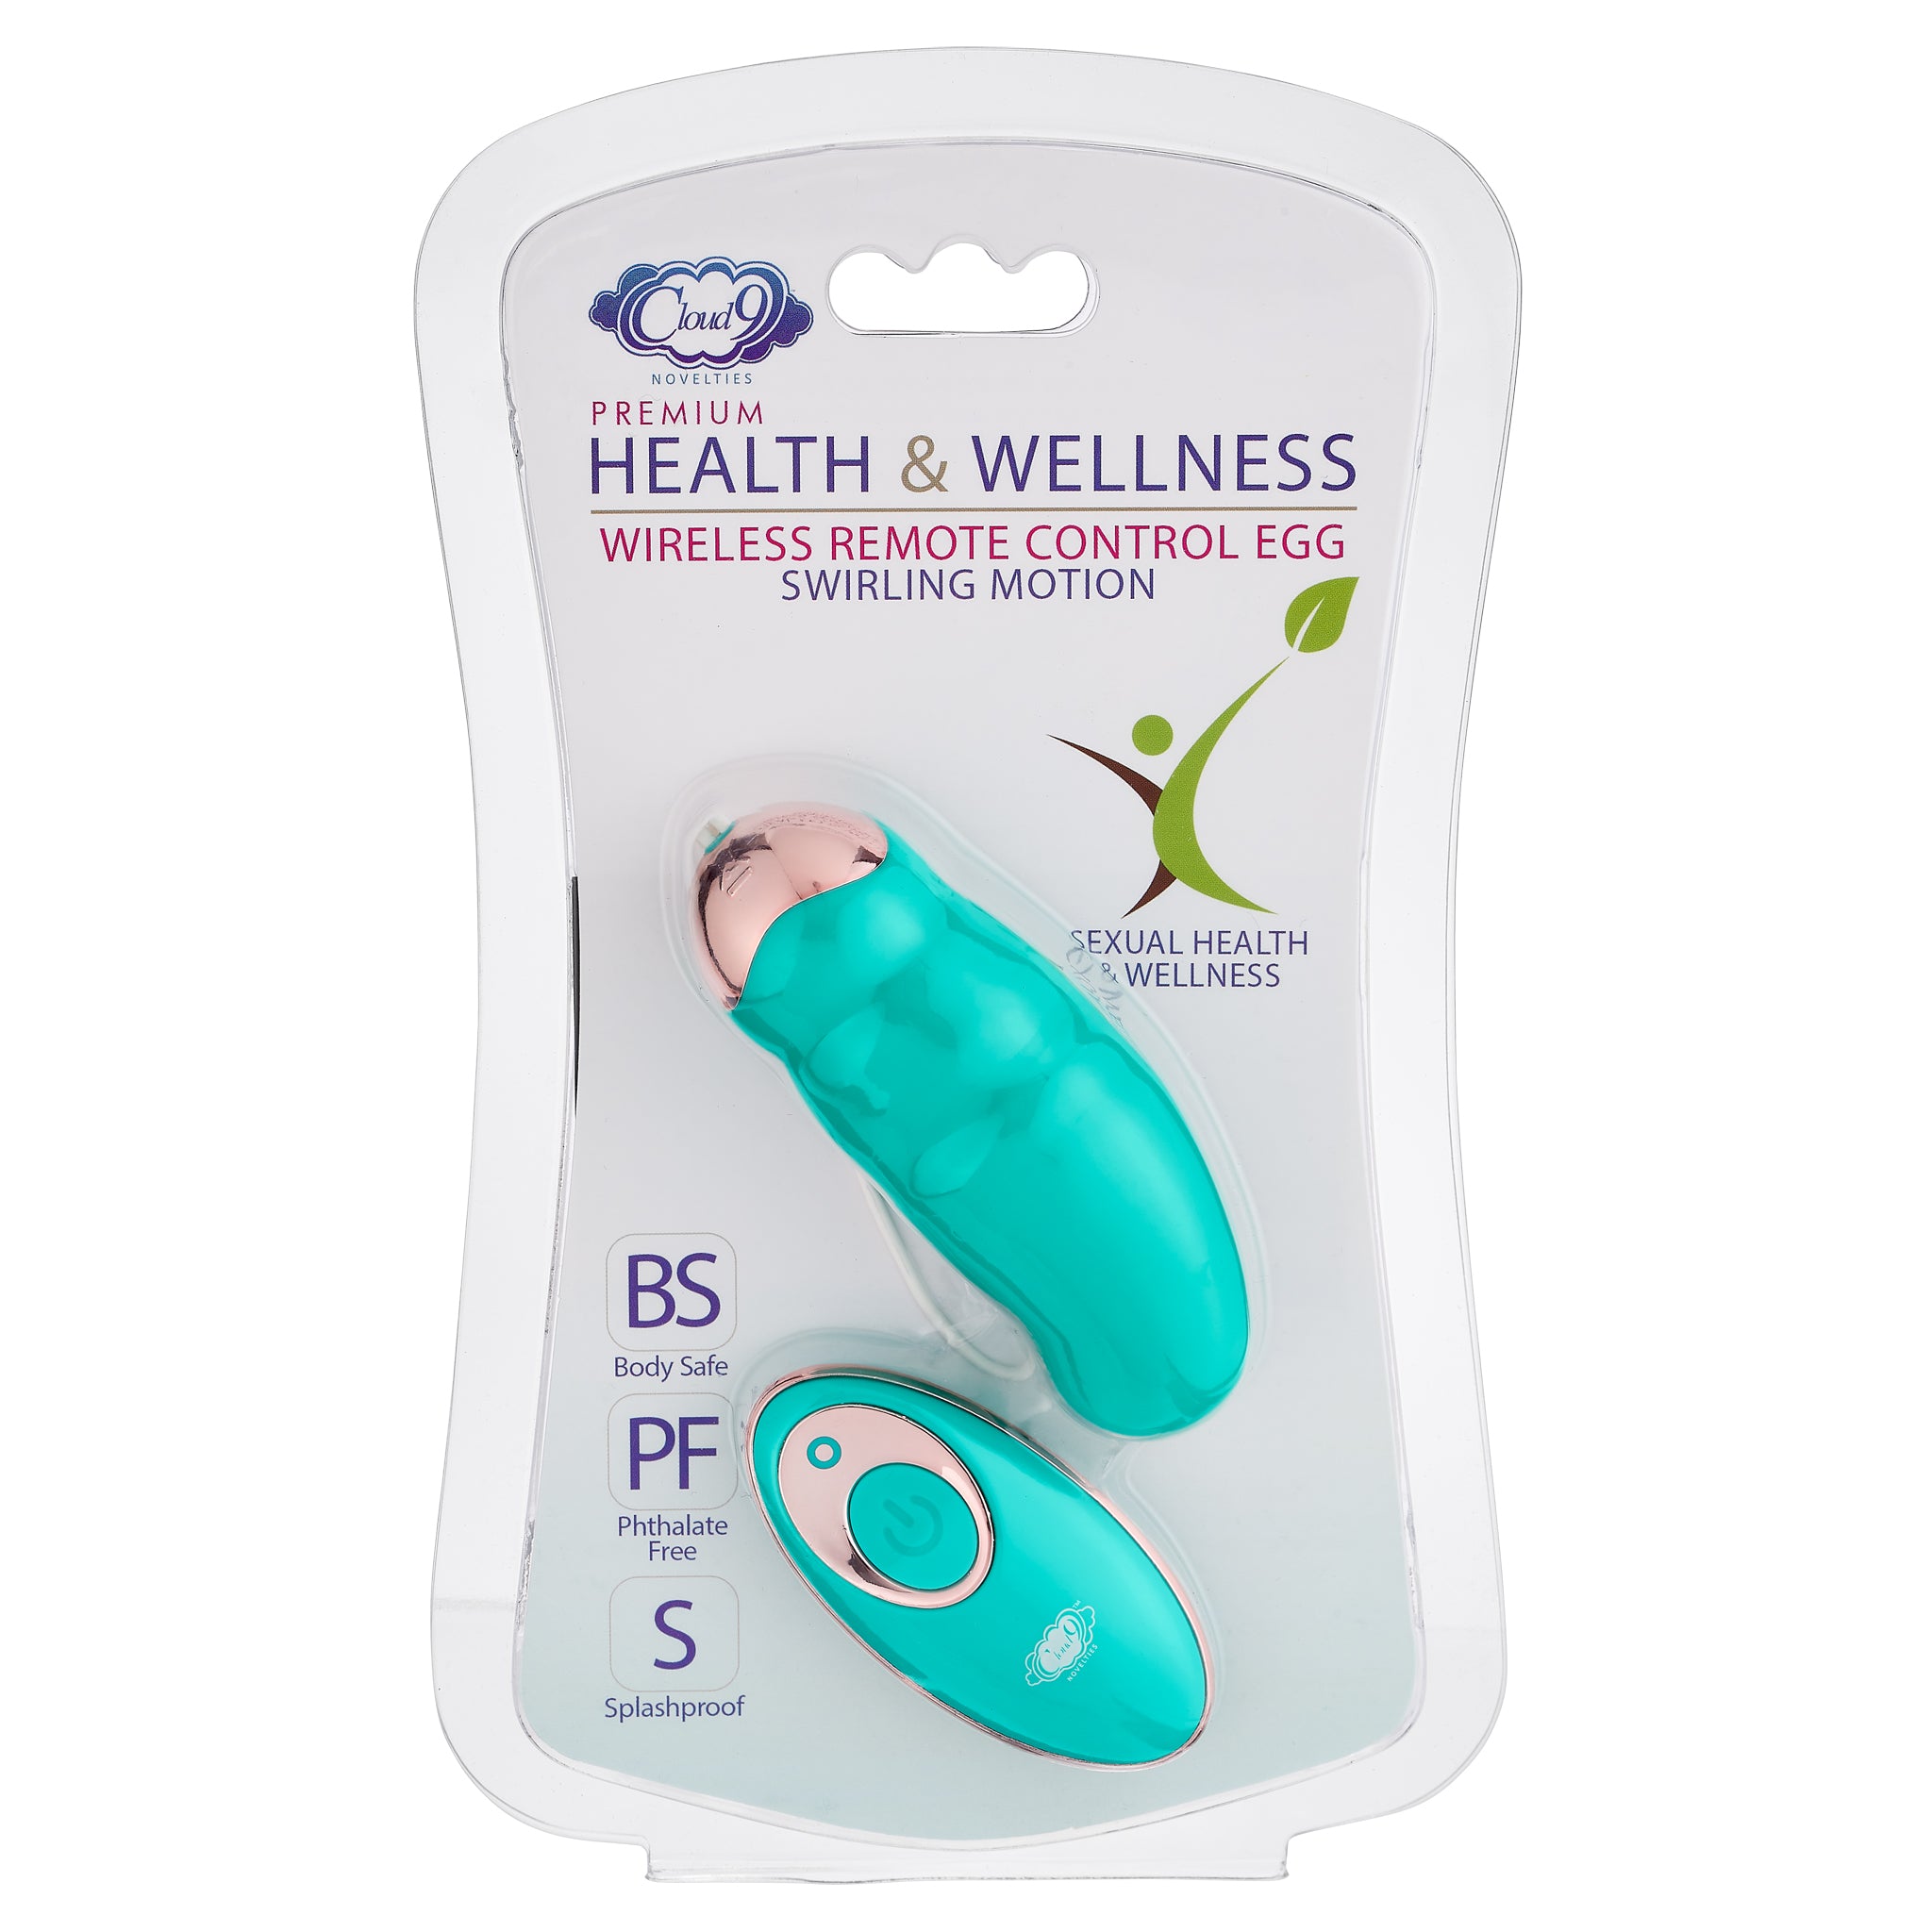 Cloud 9 Health & Wellness Wireless Remote Control Egg W/ Swirling Motion Teal